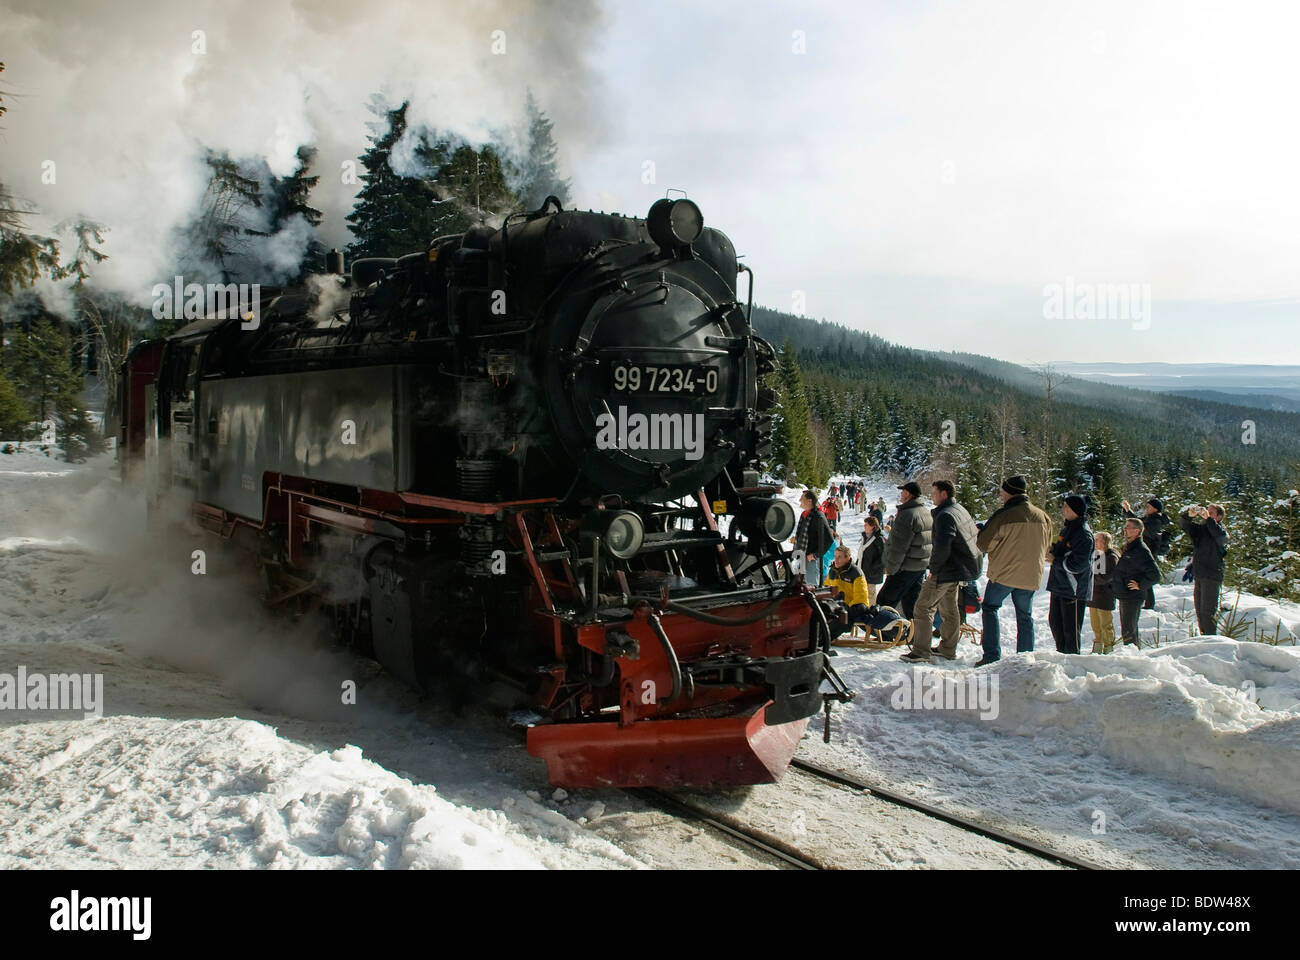 Brockenbahn, a tourist attraction in the Harz Mountains, Germany Stock Photo